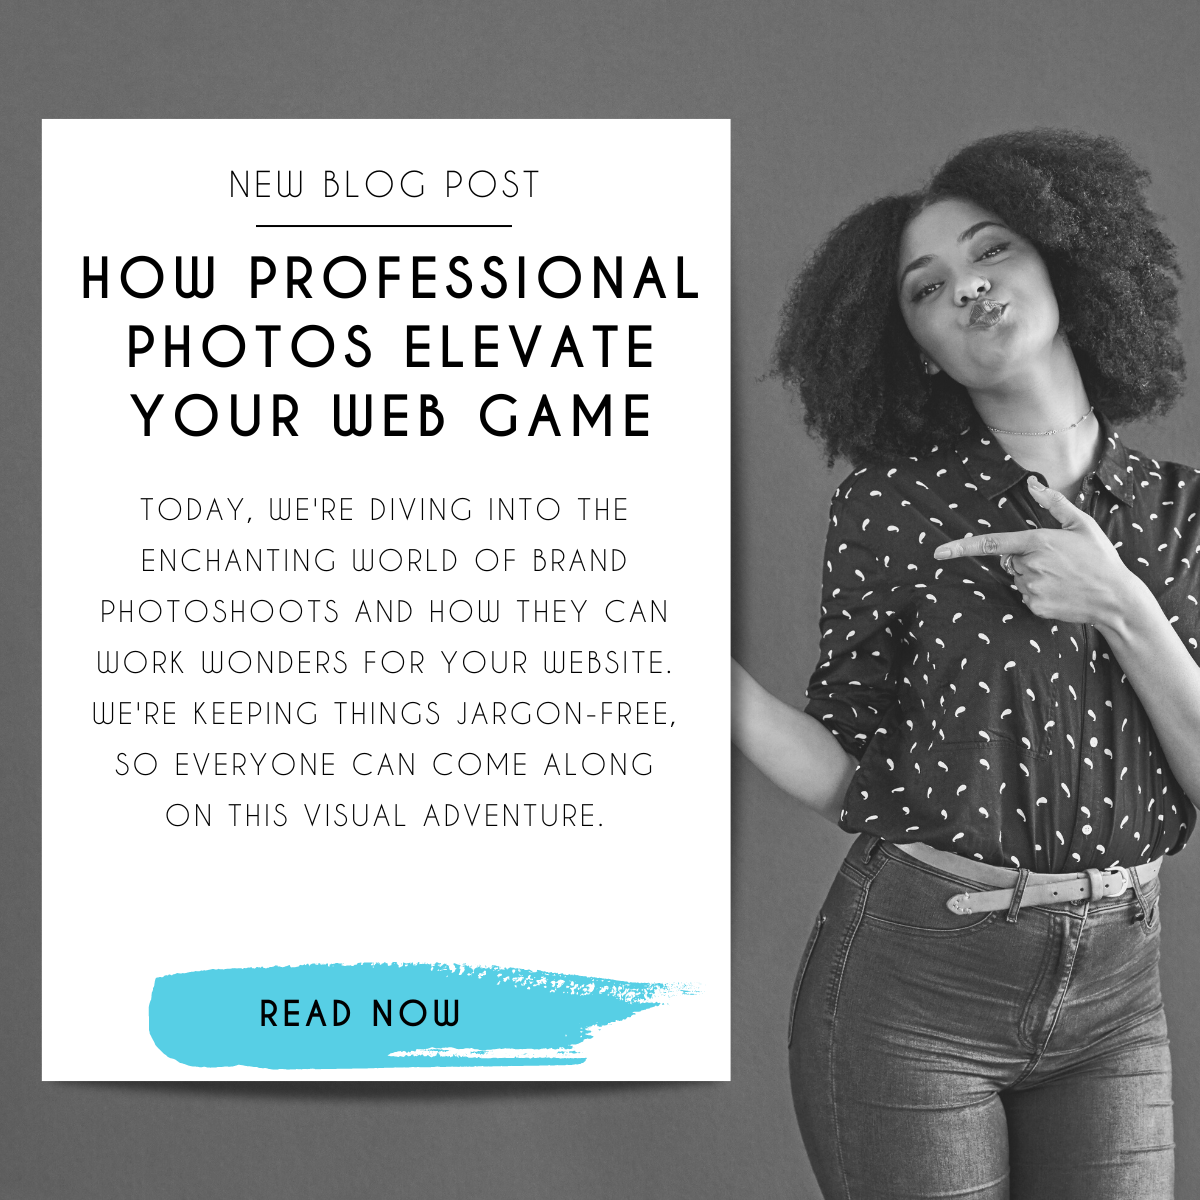 The Visual Upgrade: How Professional Photos Elevate Your Web Game